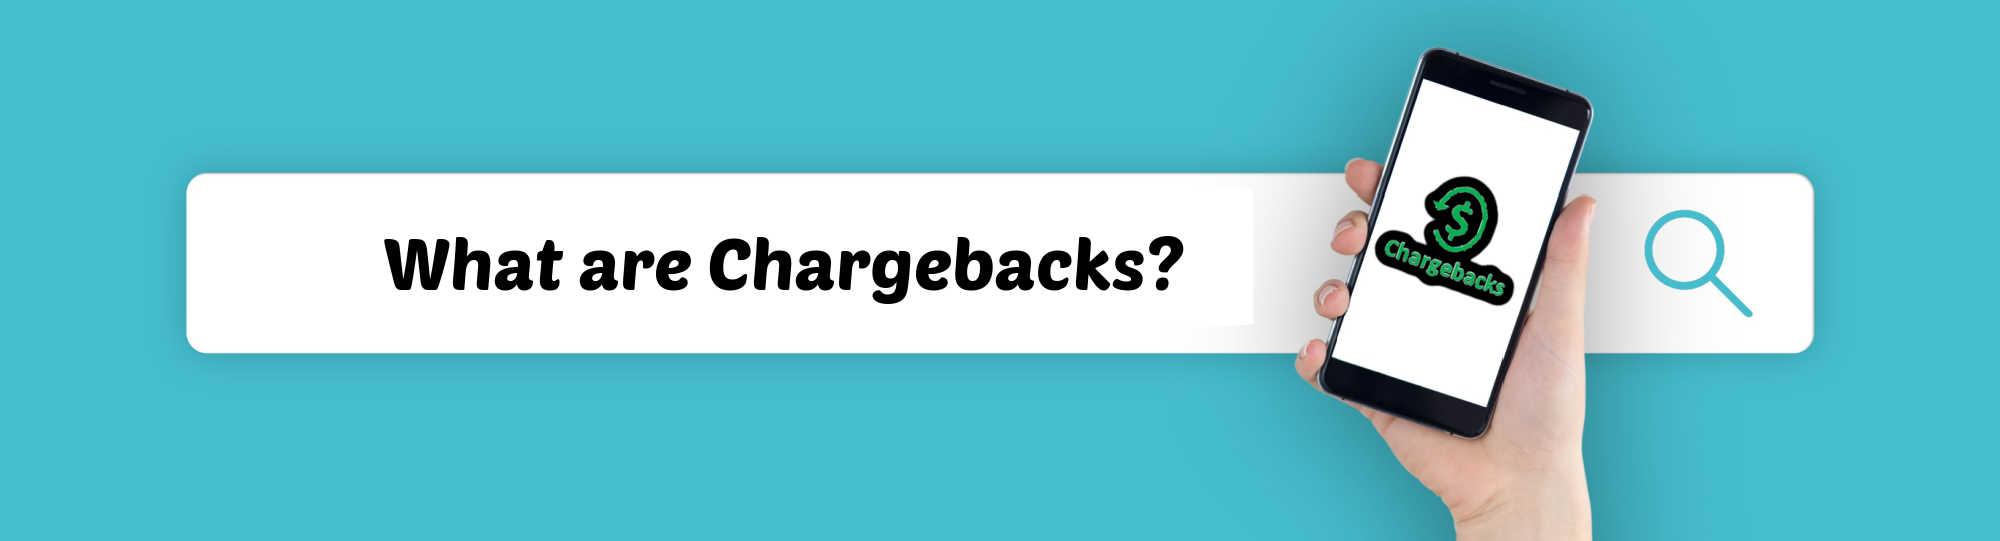 image of what are chargebacks